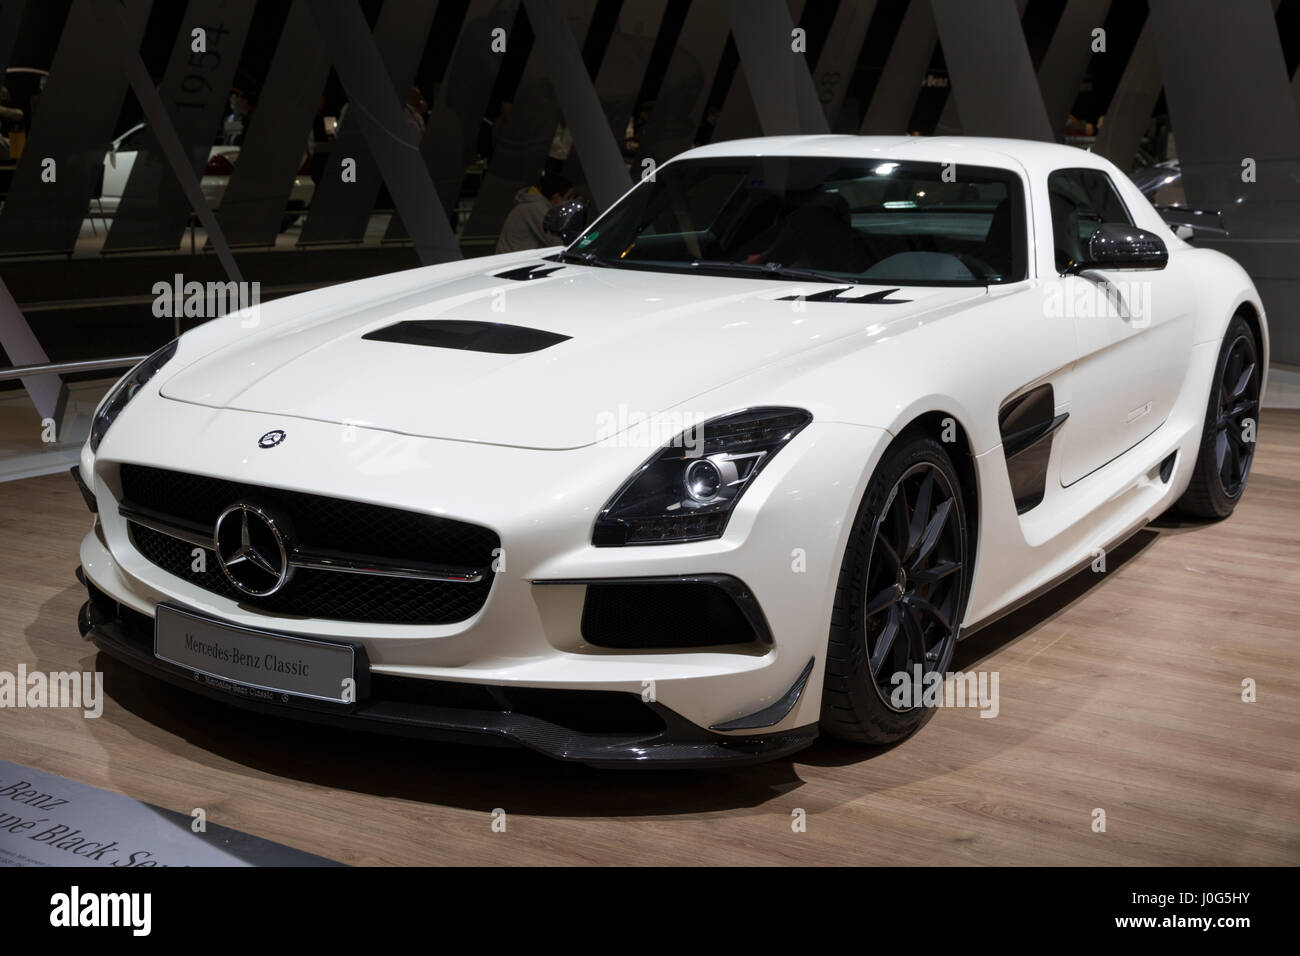 ESSEN, GERMANY - APR 6, 2017: 2013 Mercedes Benz SLS AMG Coupe Black Series (C197) sports car on display at the Techno Classica Essen Car Show. Stock Photo